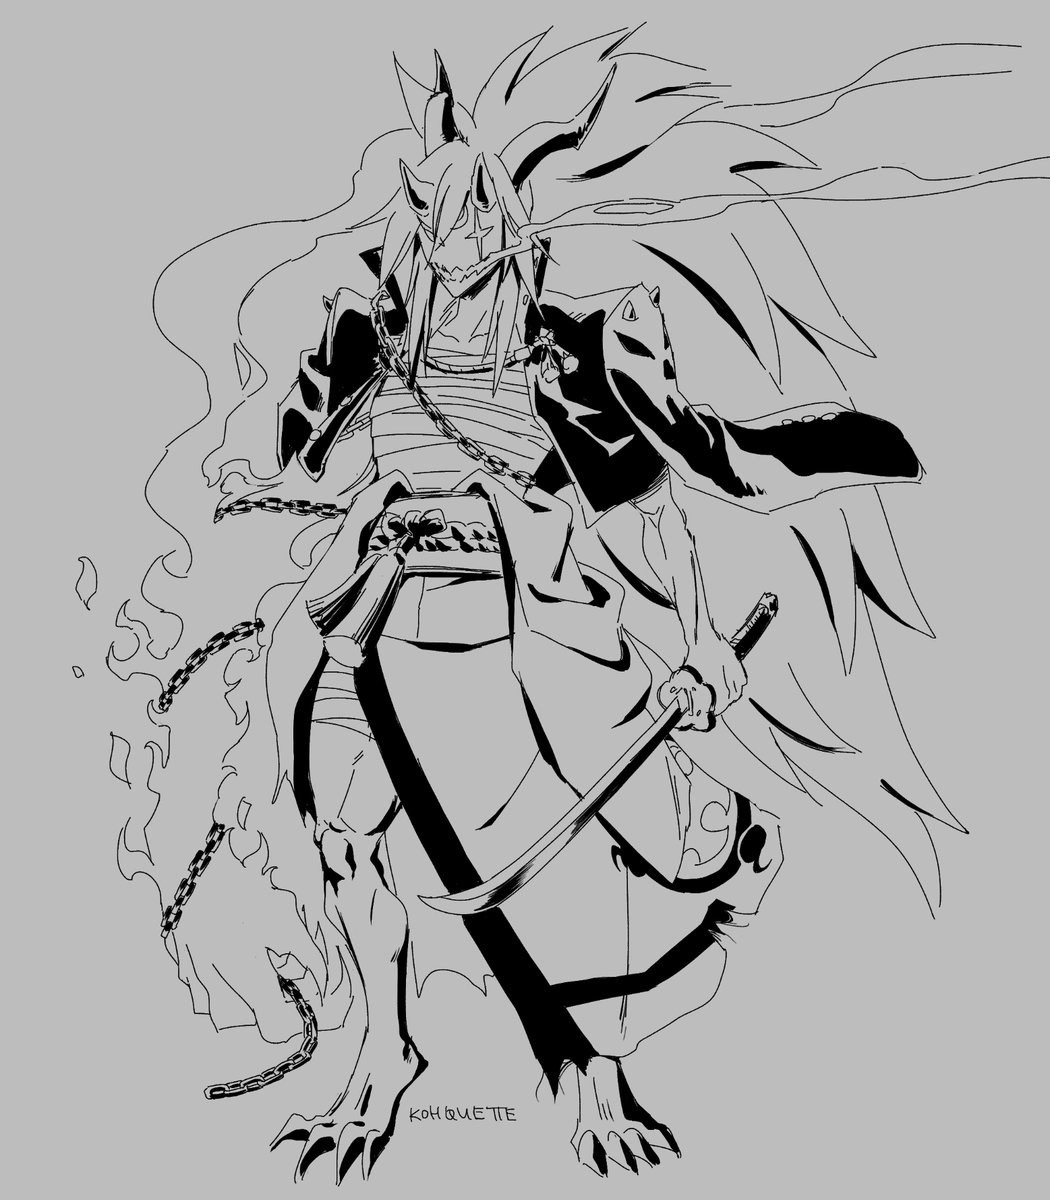 Thanks for watching stream! WIPs from today, went a little nuts on Dragon Install Baiken lmao. More on Wednesday stream! #guiltygear 